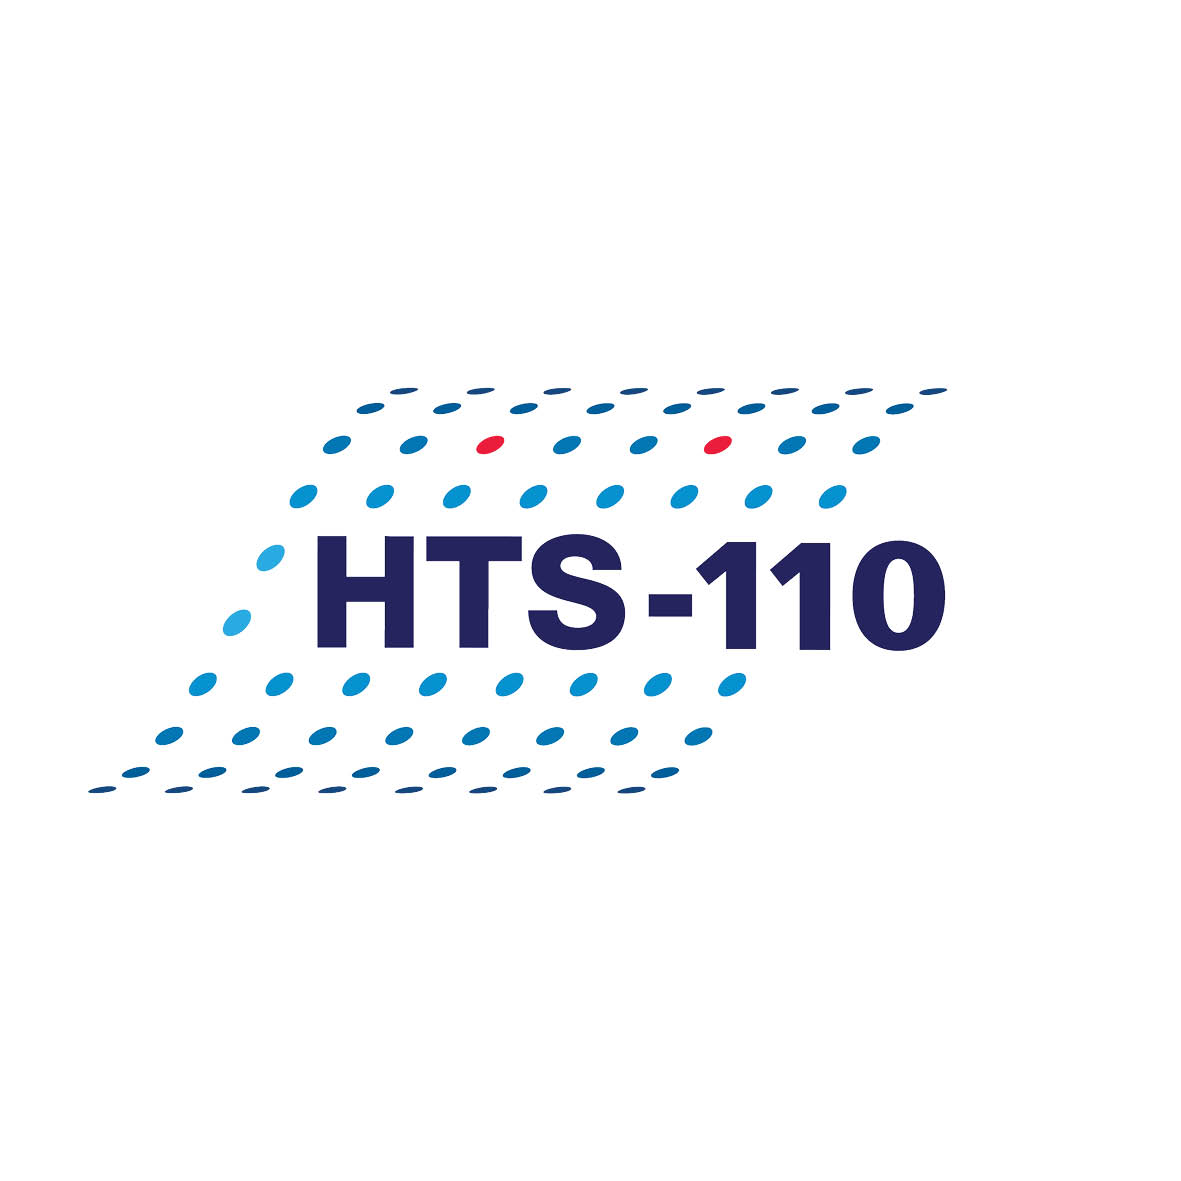 Why HTS-110?